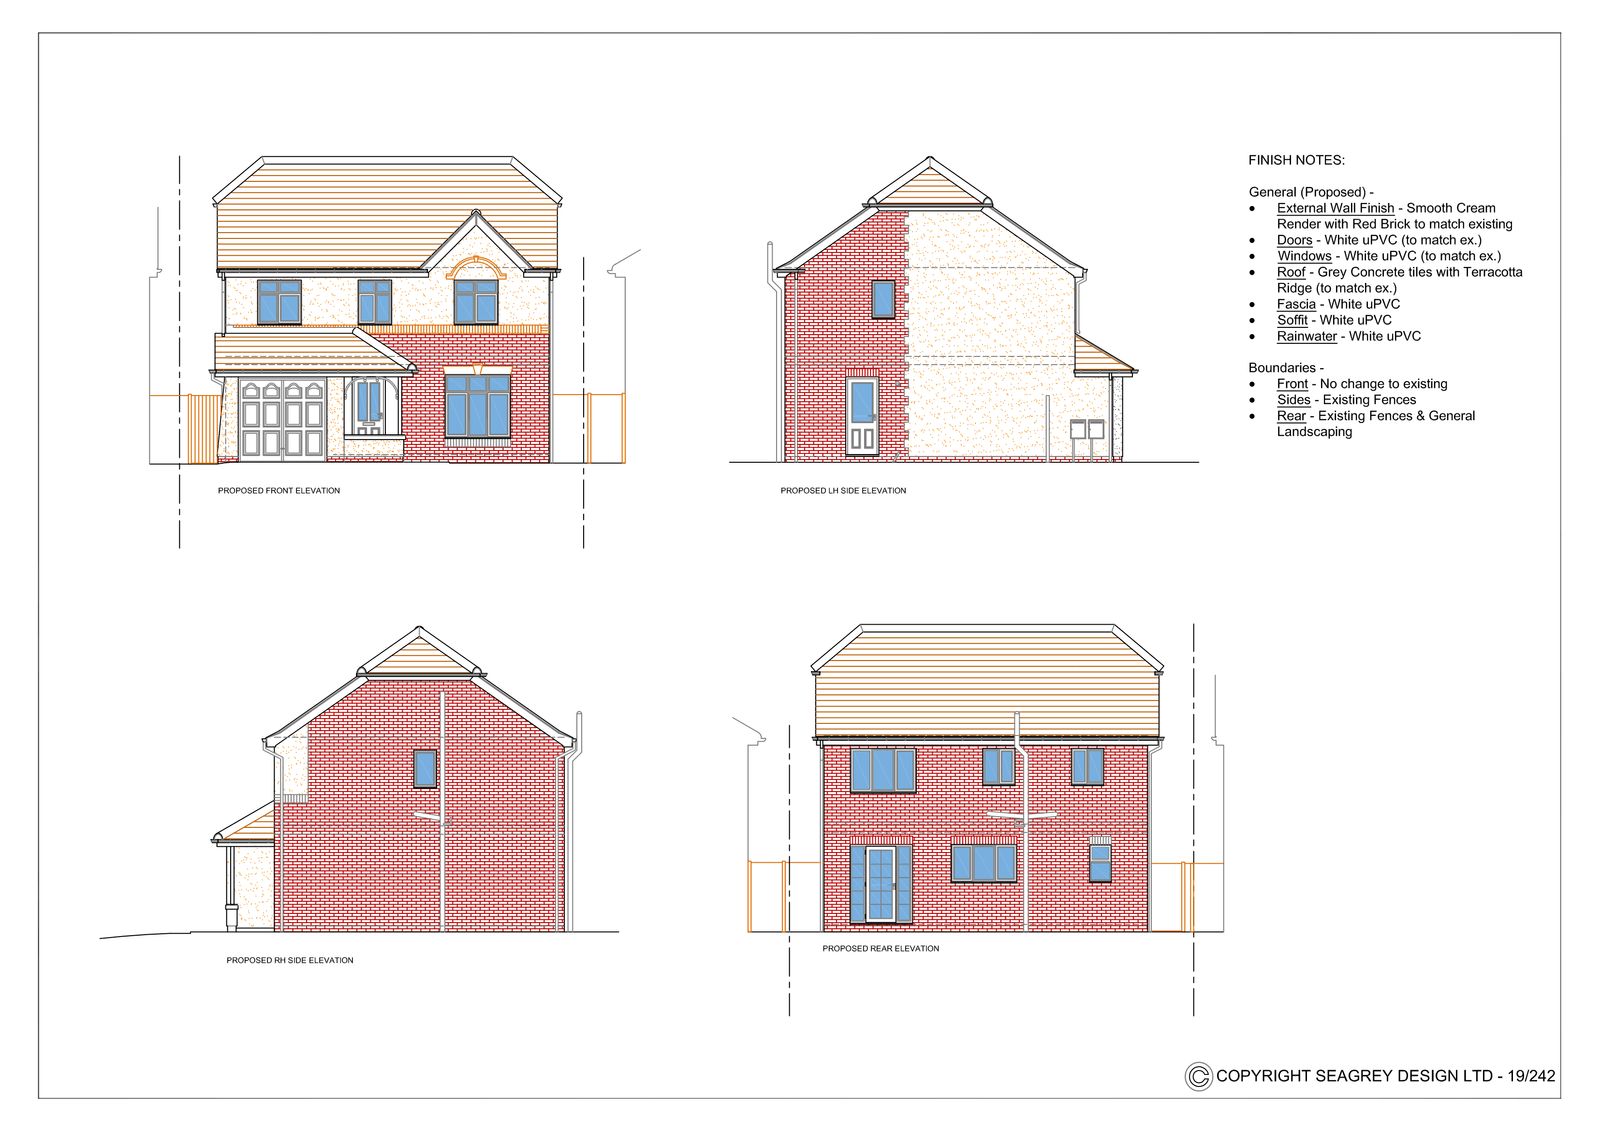 Proposed Plans